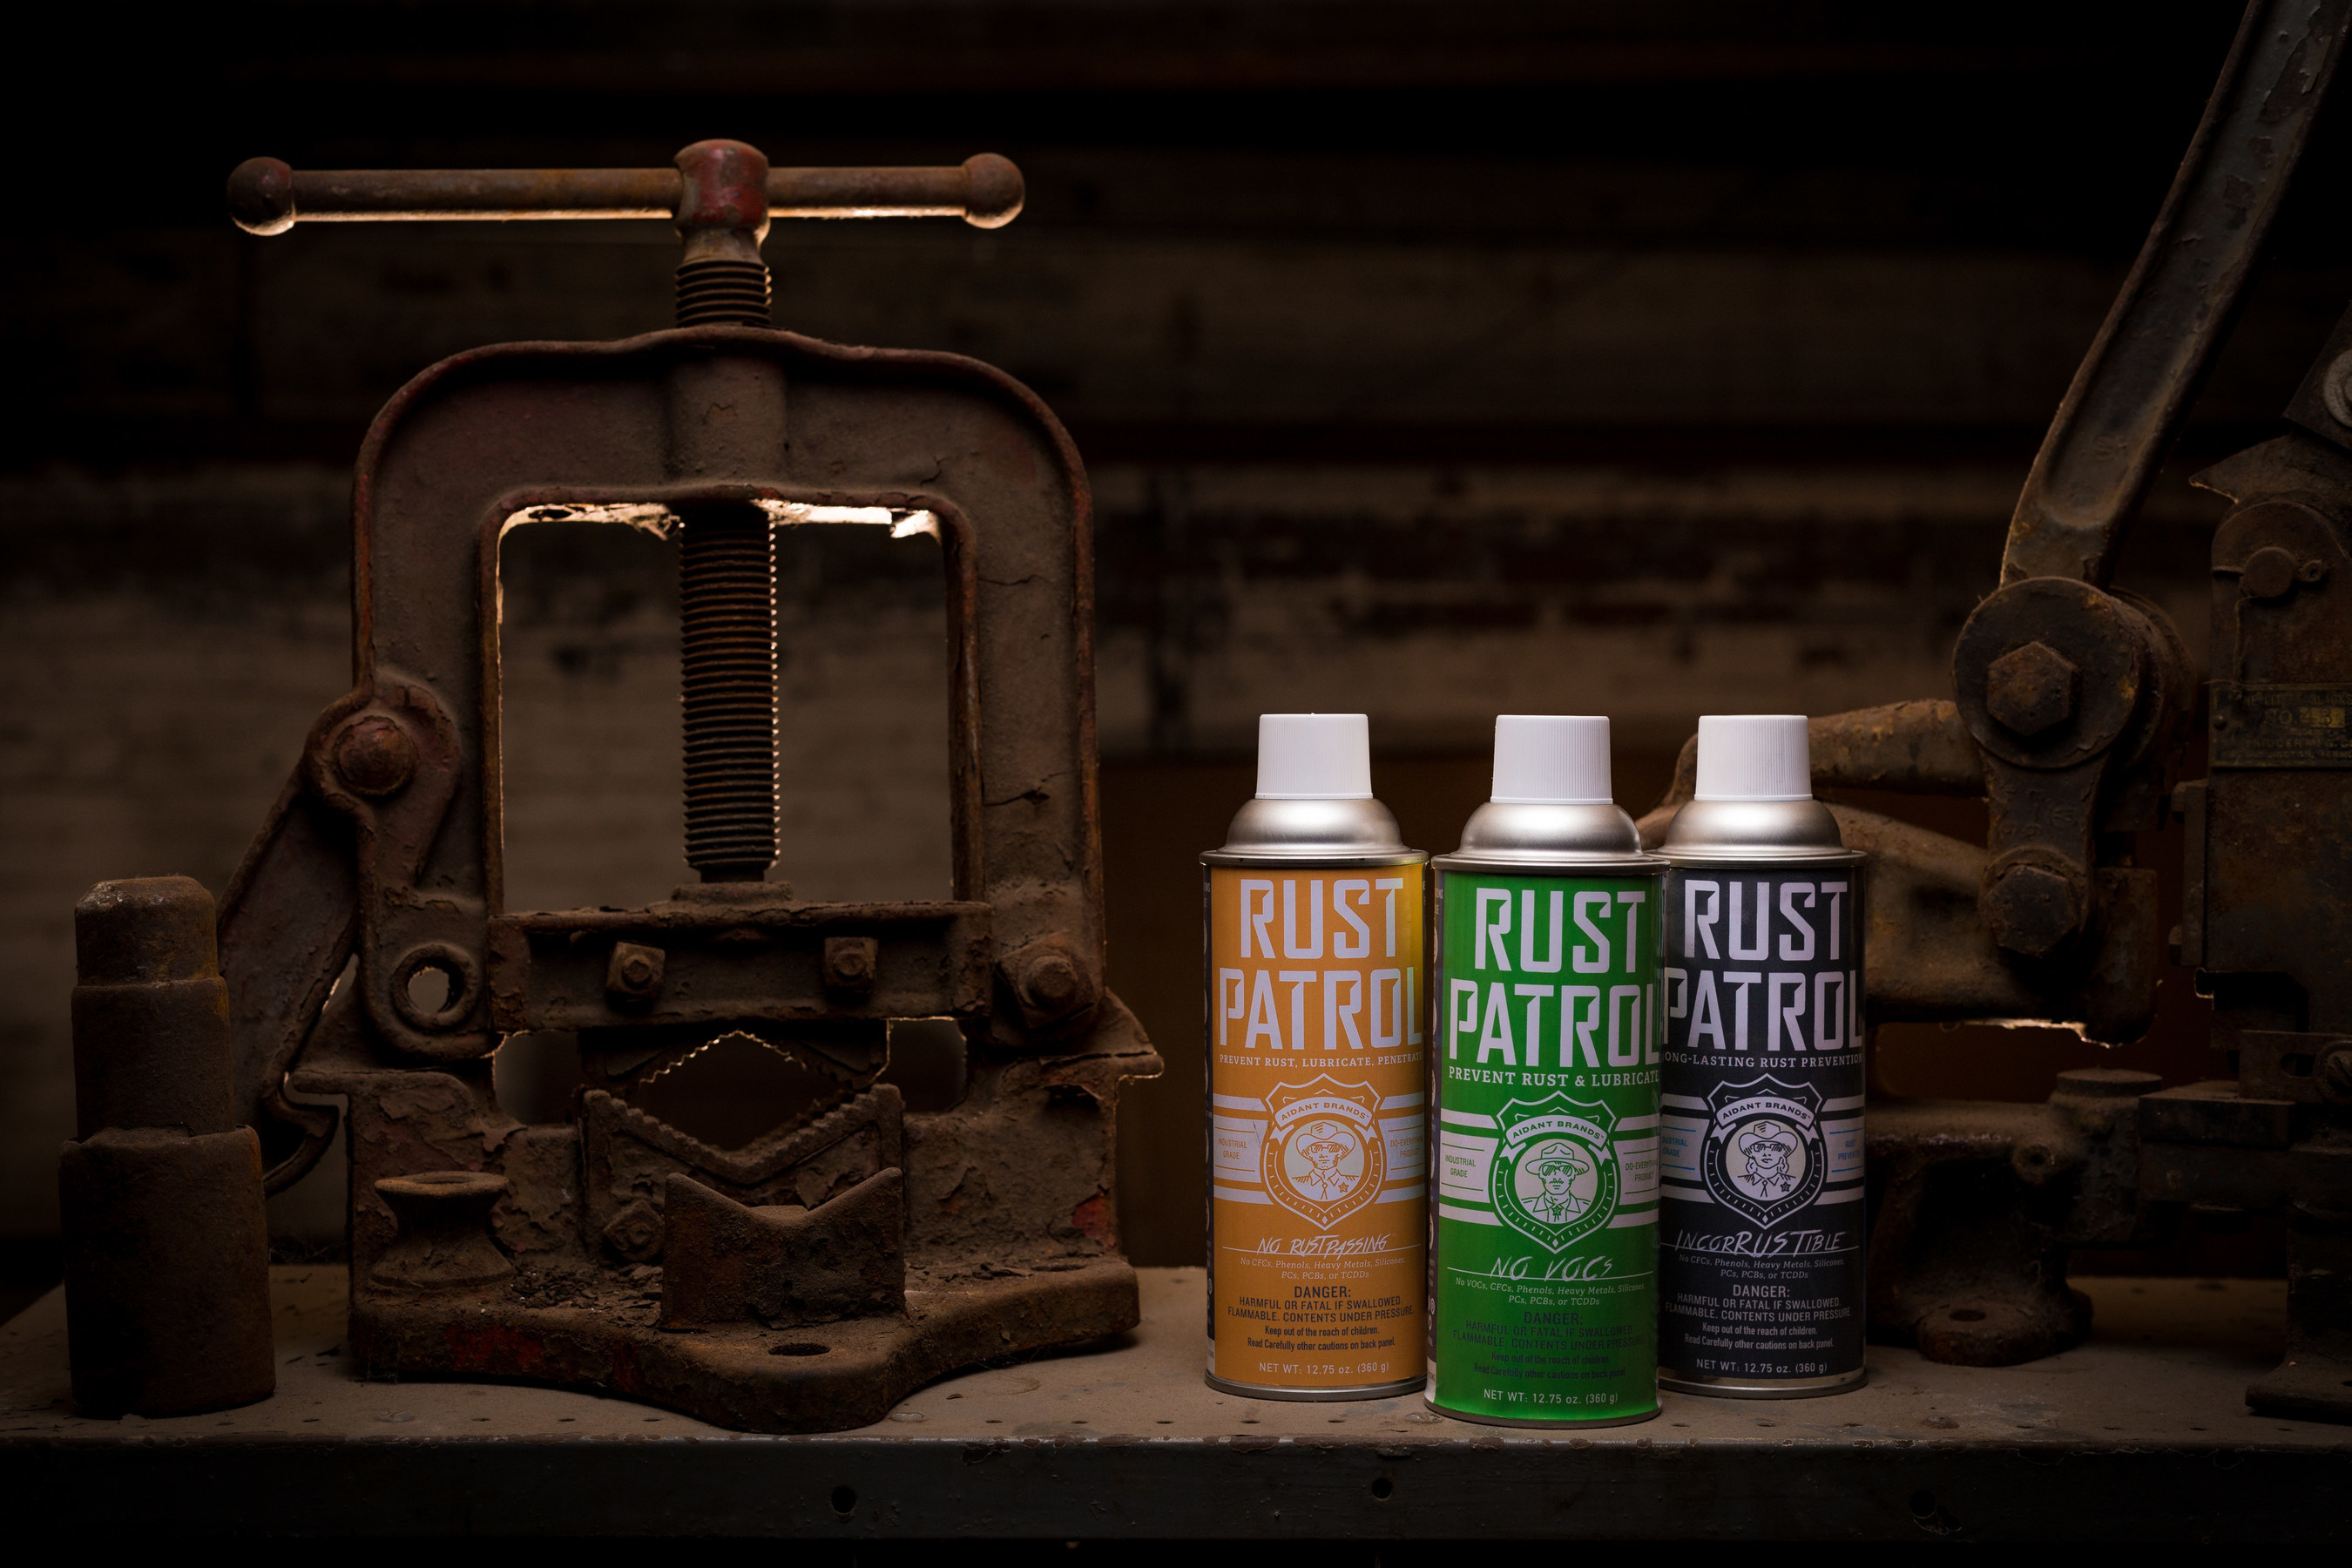 Rust Patrol Product line: (Left to Right) Rust Patrol, Rust Patrol no VOCs and Rust Patrol Incorrustible)